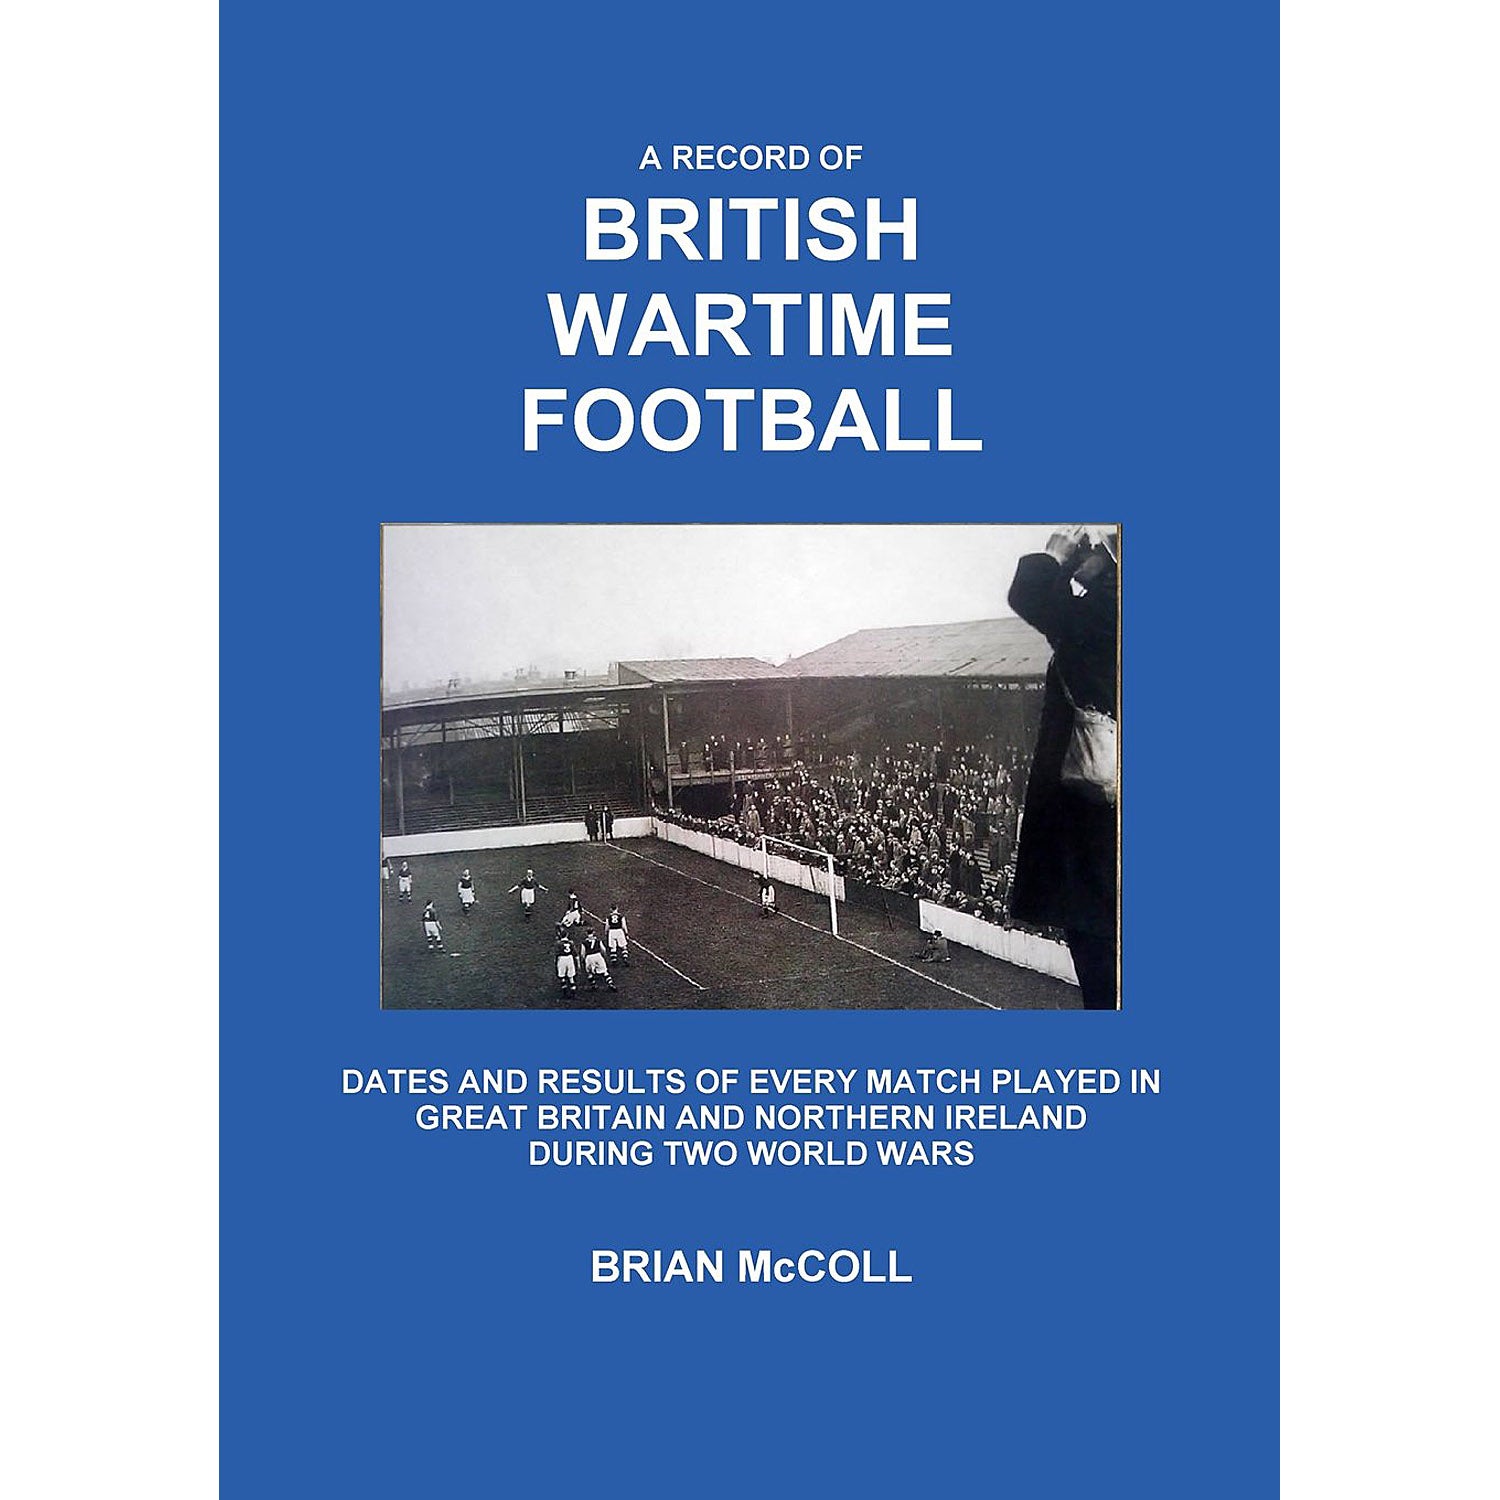 A Record of British Wartime Football